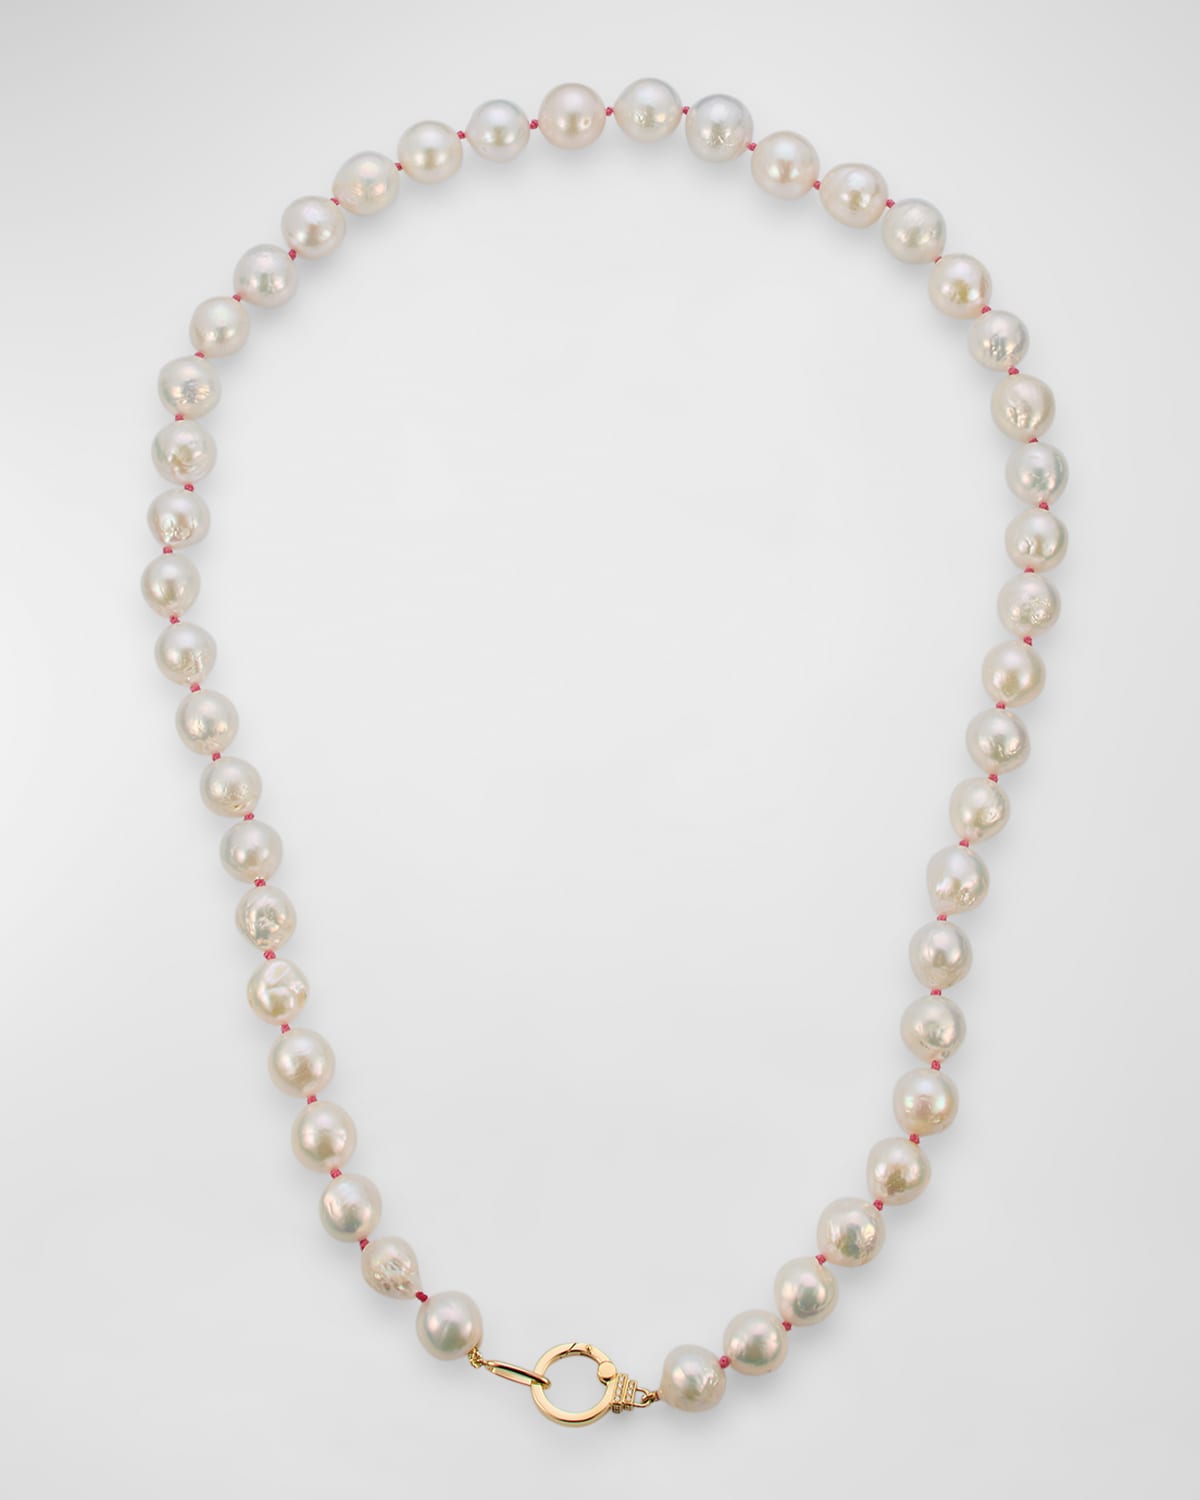 18K Yellow Gold Pink String Necklace with Freshwater Pearls and GH-SI Diamonds, 26"L